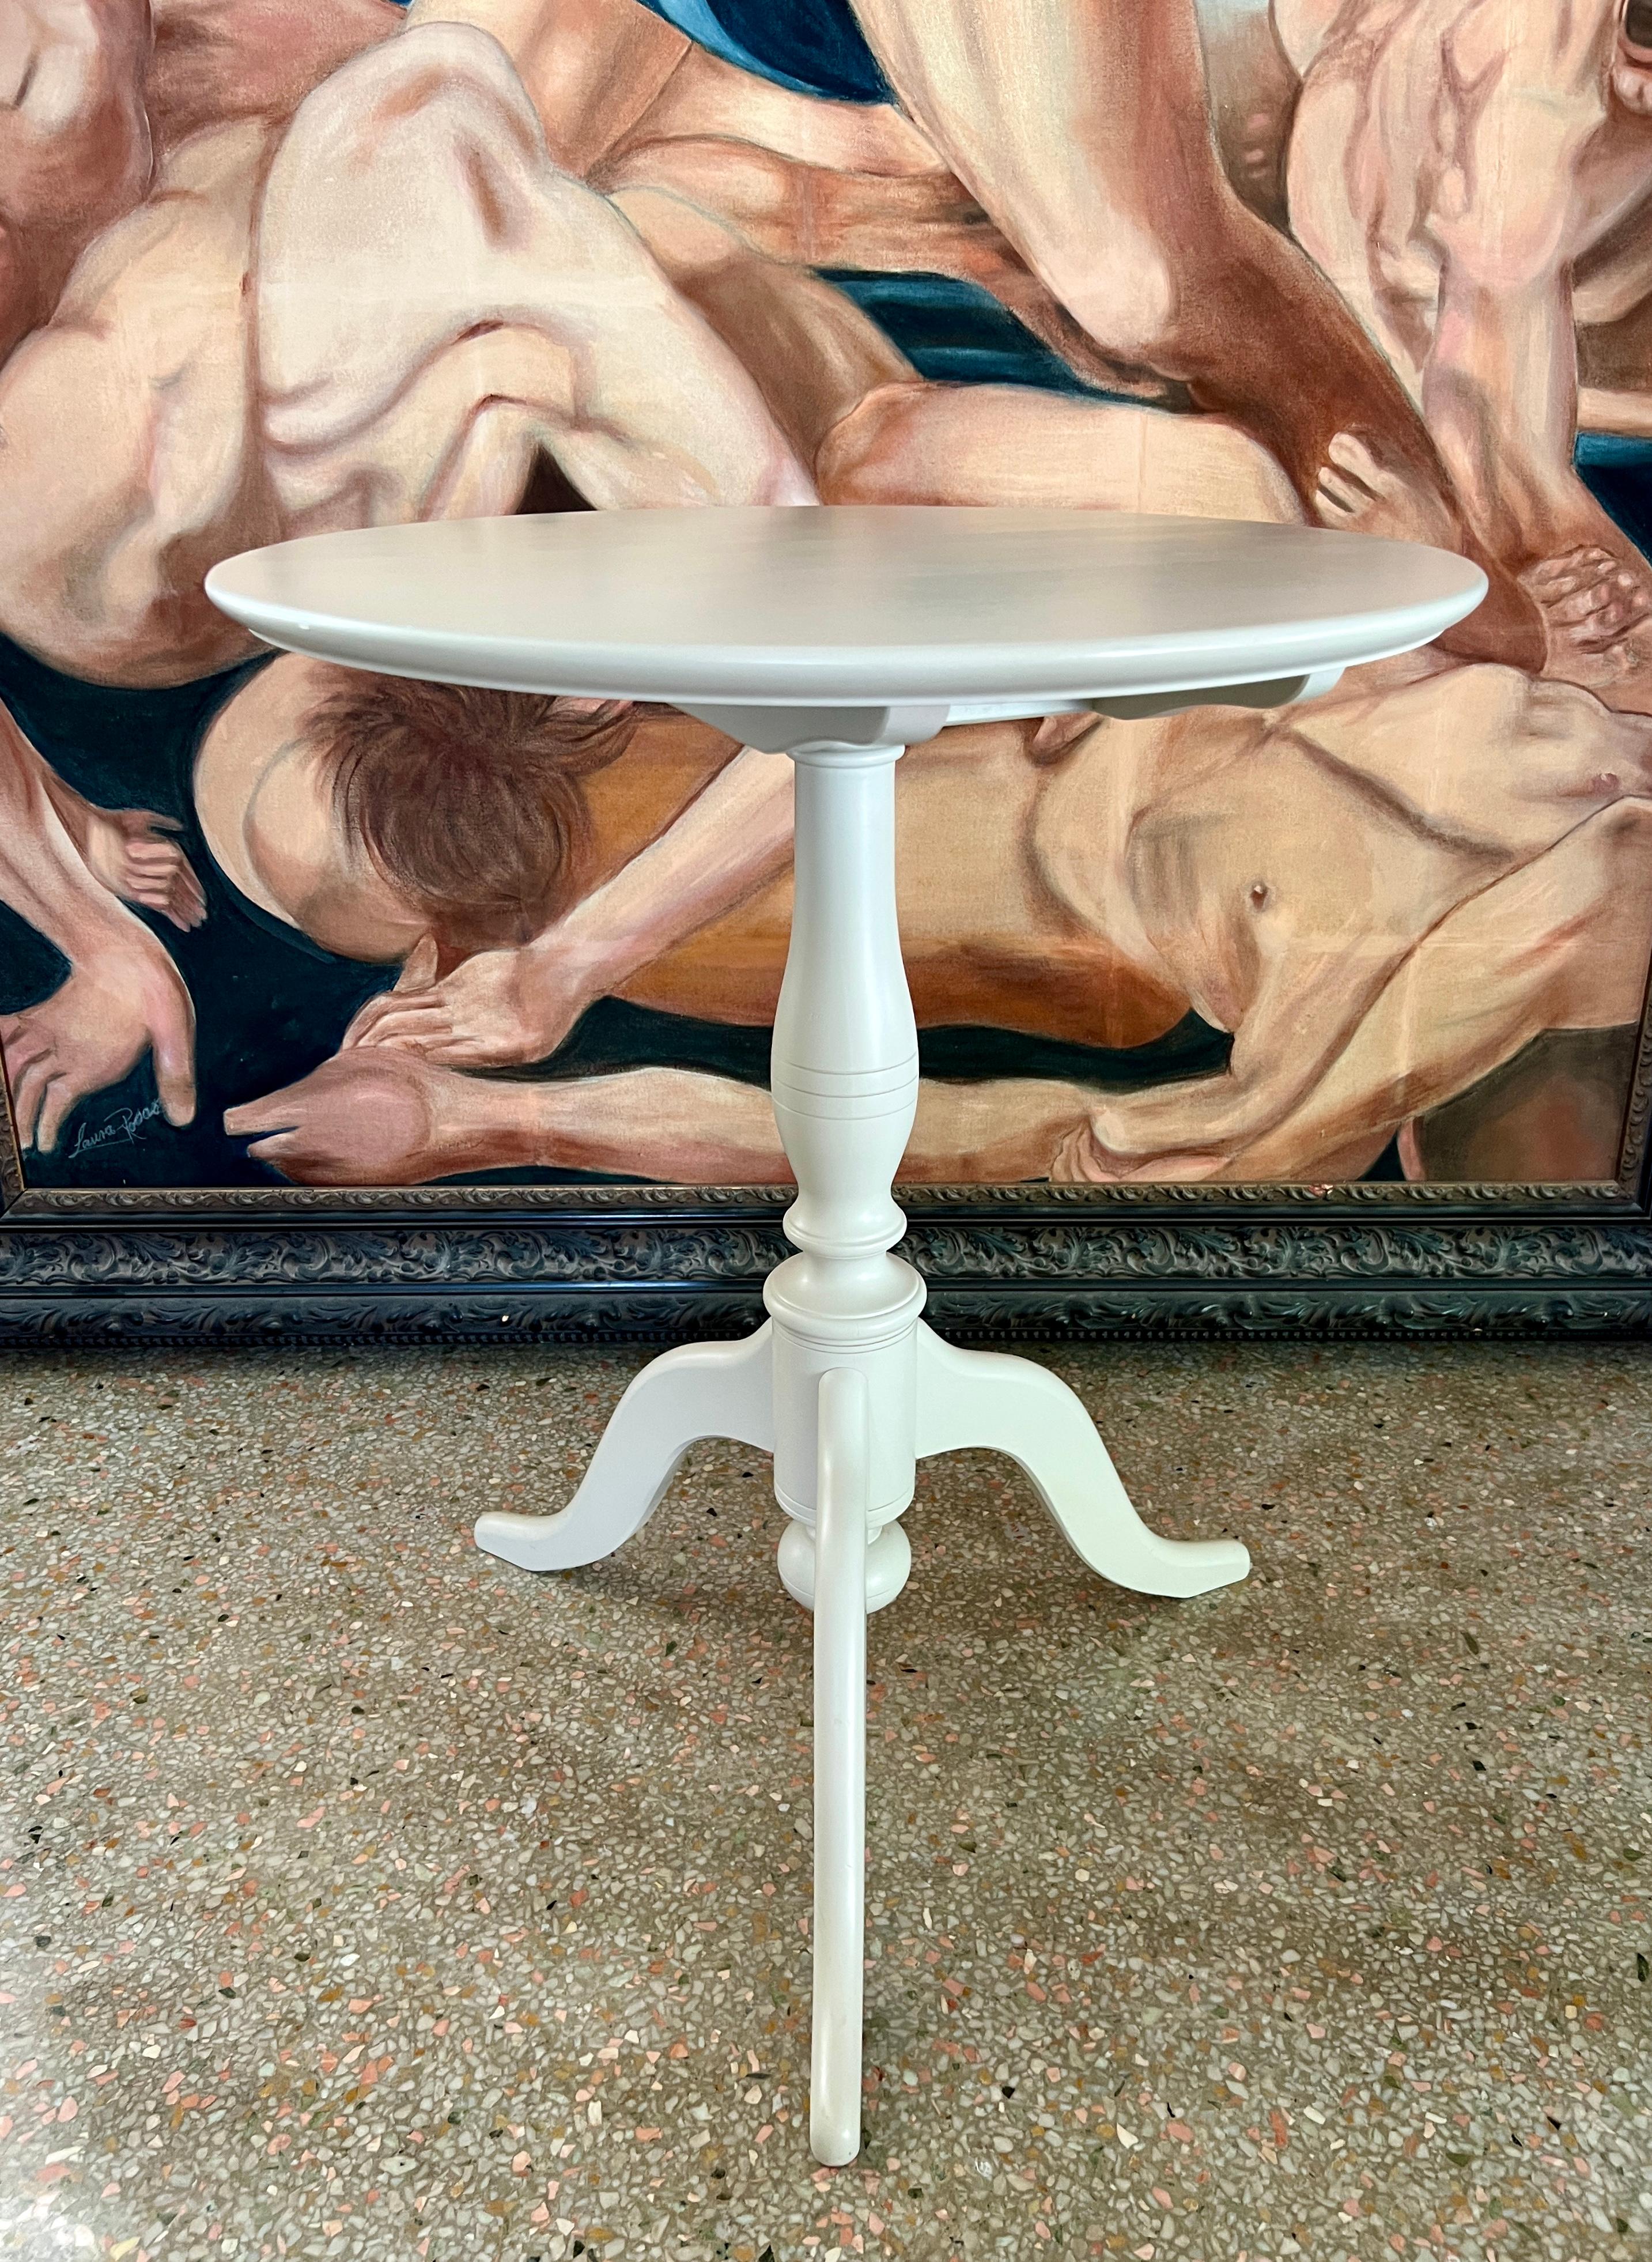 Gustavian style table based on antique guéridon tables from 19th Century Sweden, with tilted top feature. The tilt mechanism allows the tabletop to fully turn and lock sideways while not in use. The wood table has a round top with a tripod base. It